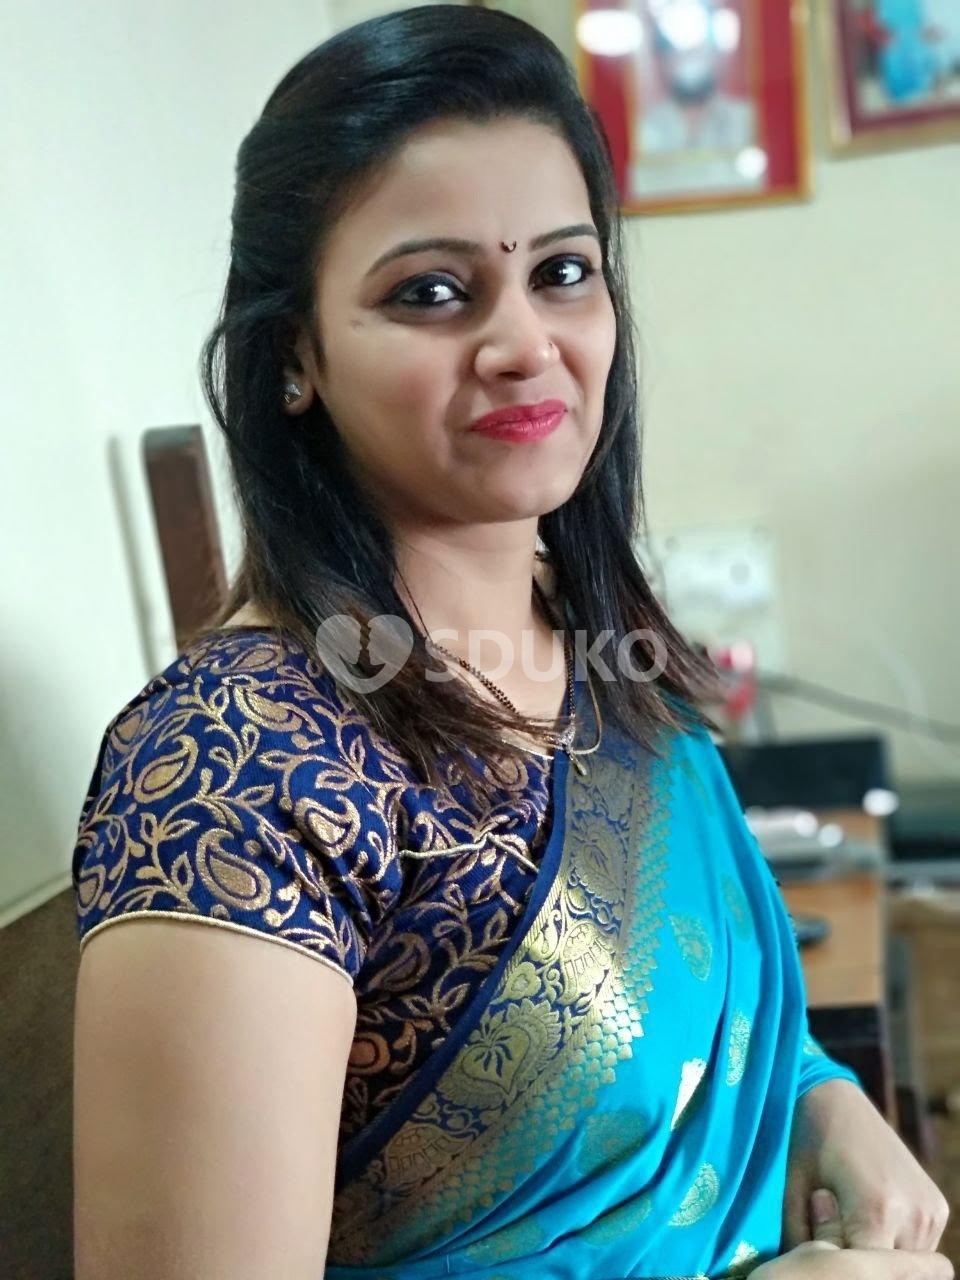 Poonamallee....low price 🥰100% SAFE AND SECURE TODAY LOW PRICE UNLIMITED ENJOY HOT COLLEGE GIRL HOUSEWIFE AUNTIES AVA